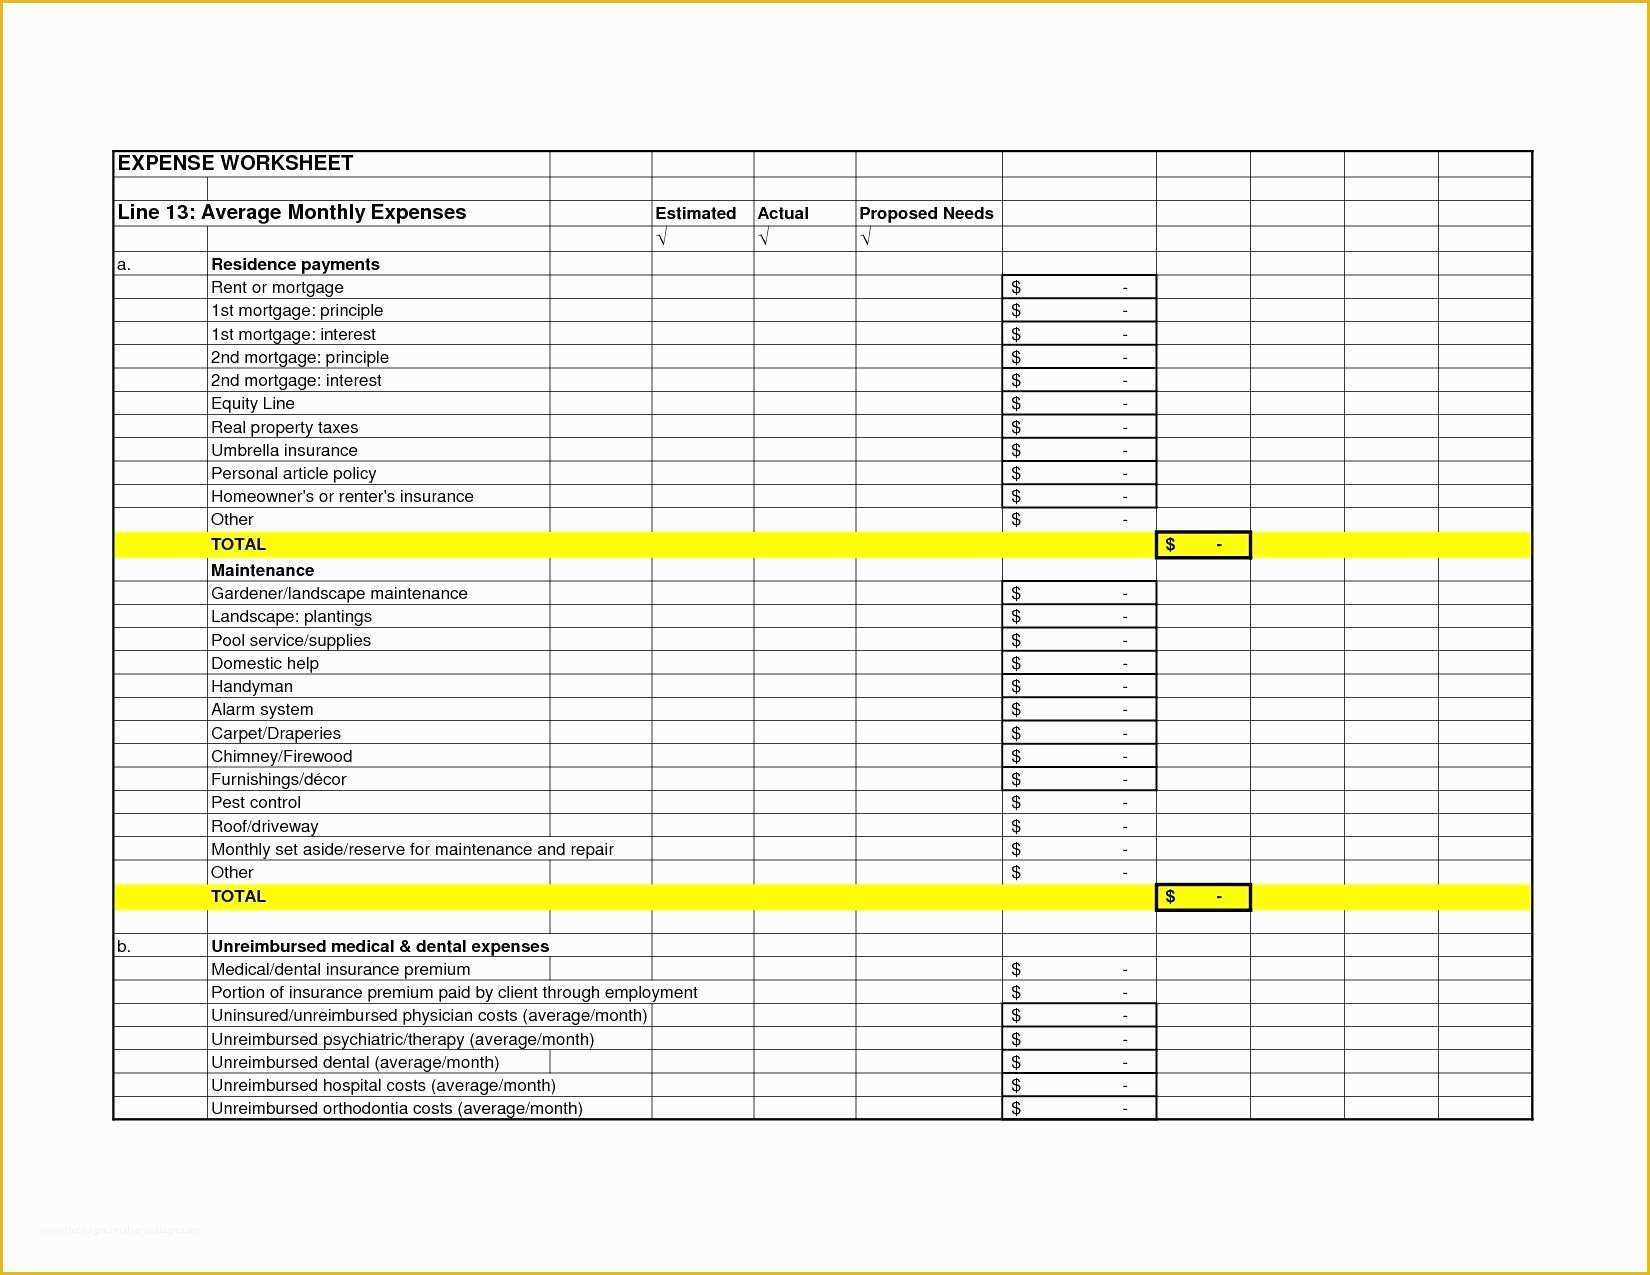 Employee Database Excel Template Free Of Employee Database Excel Template Glendale Munity